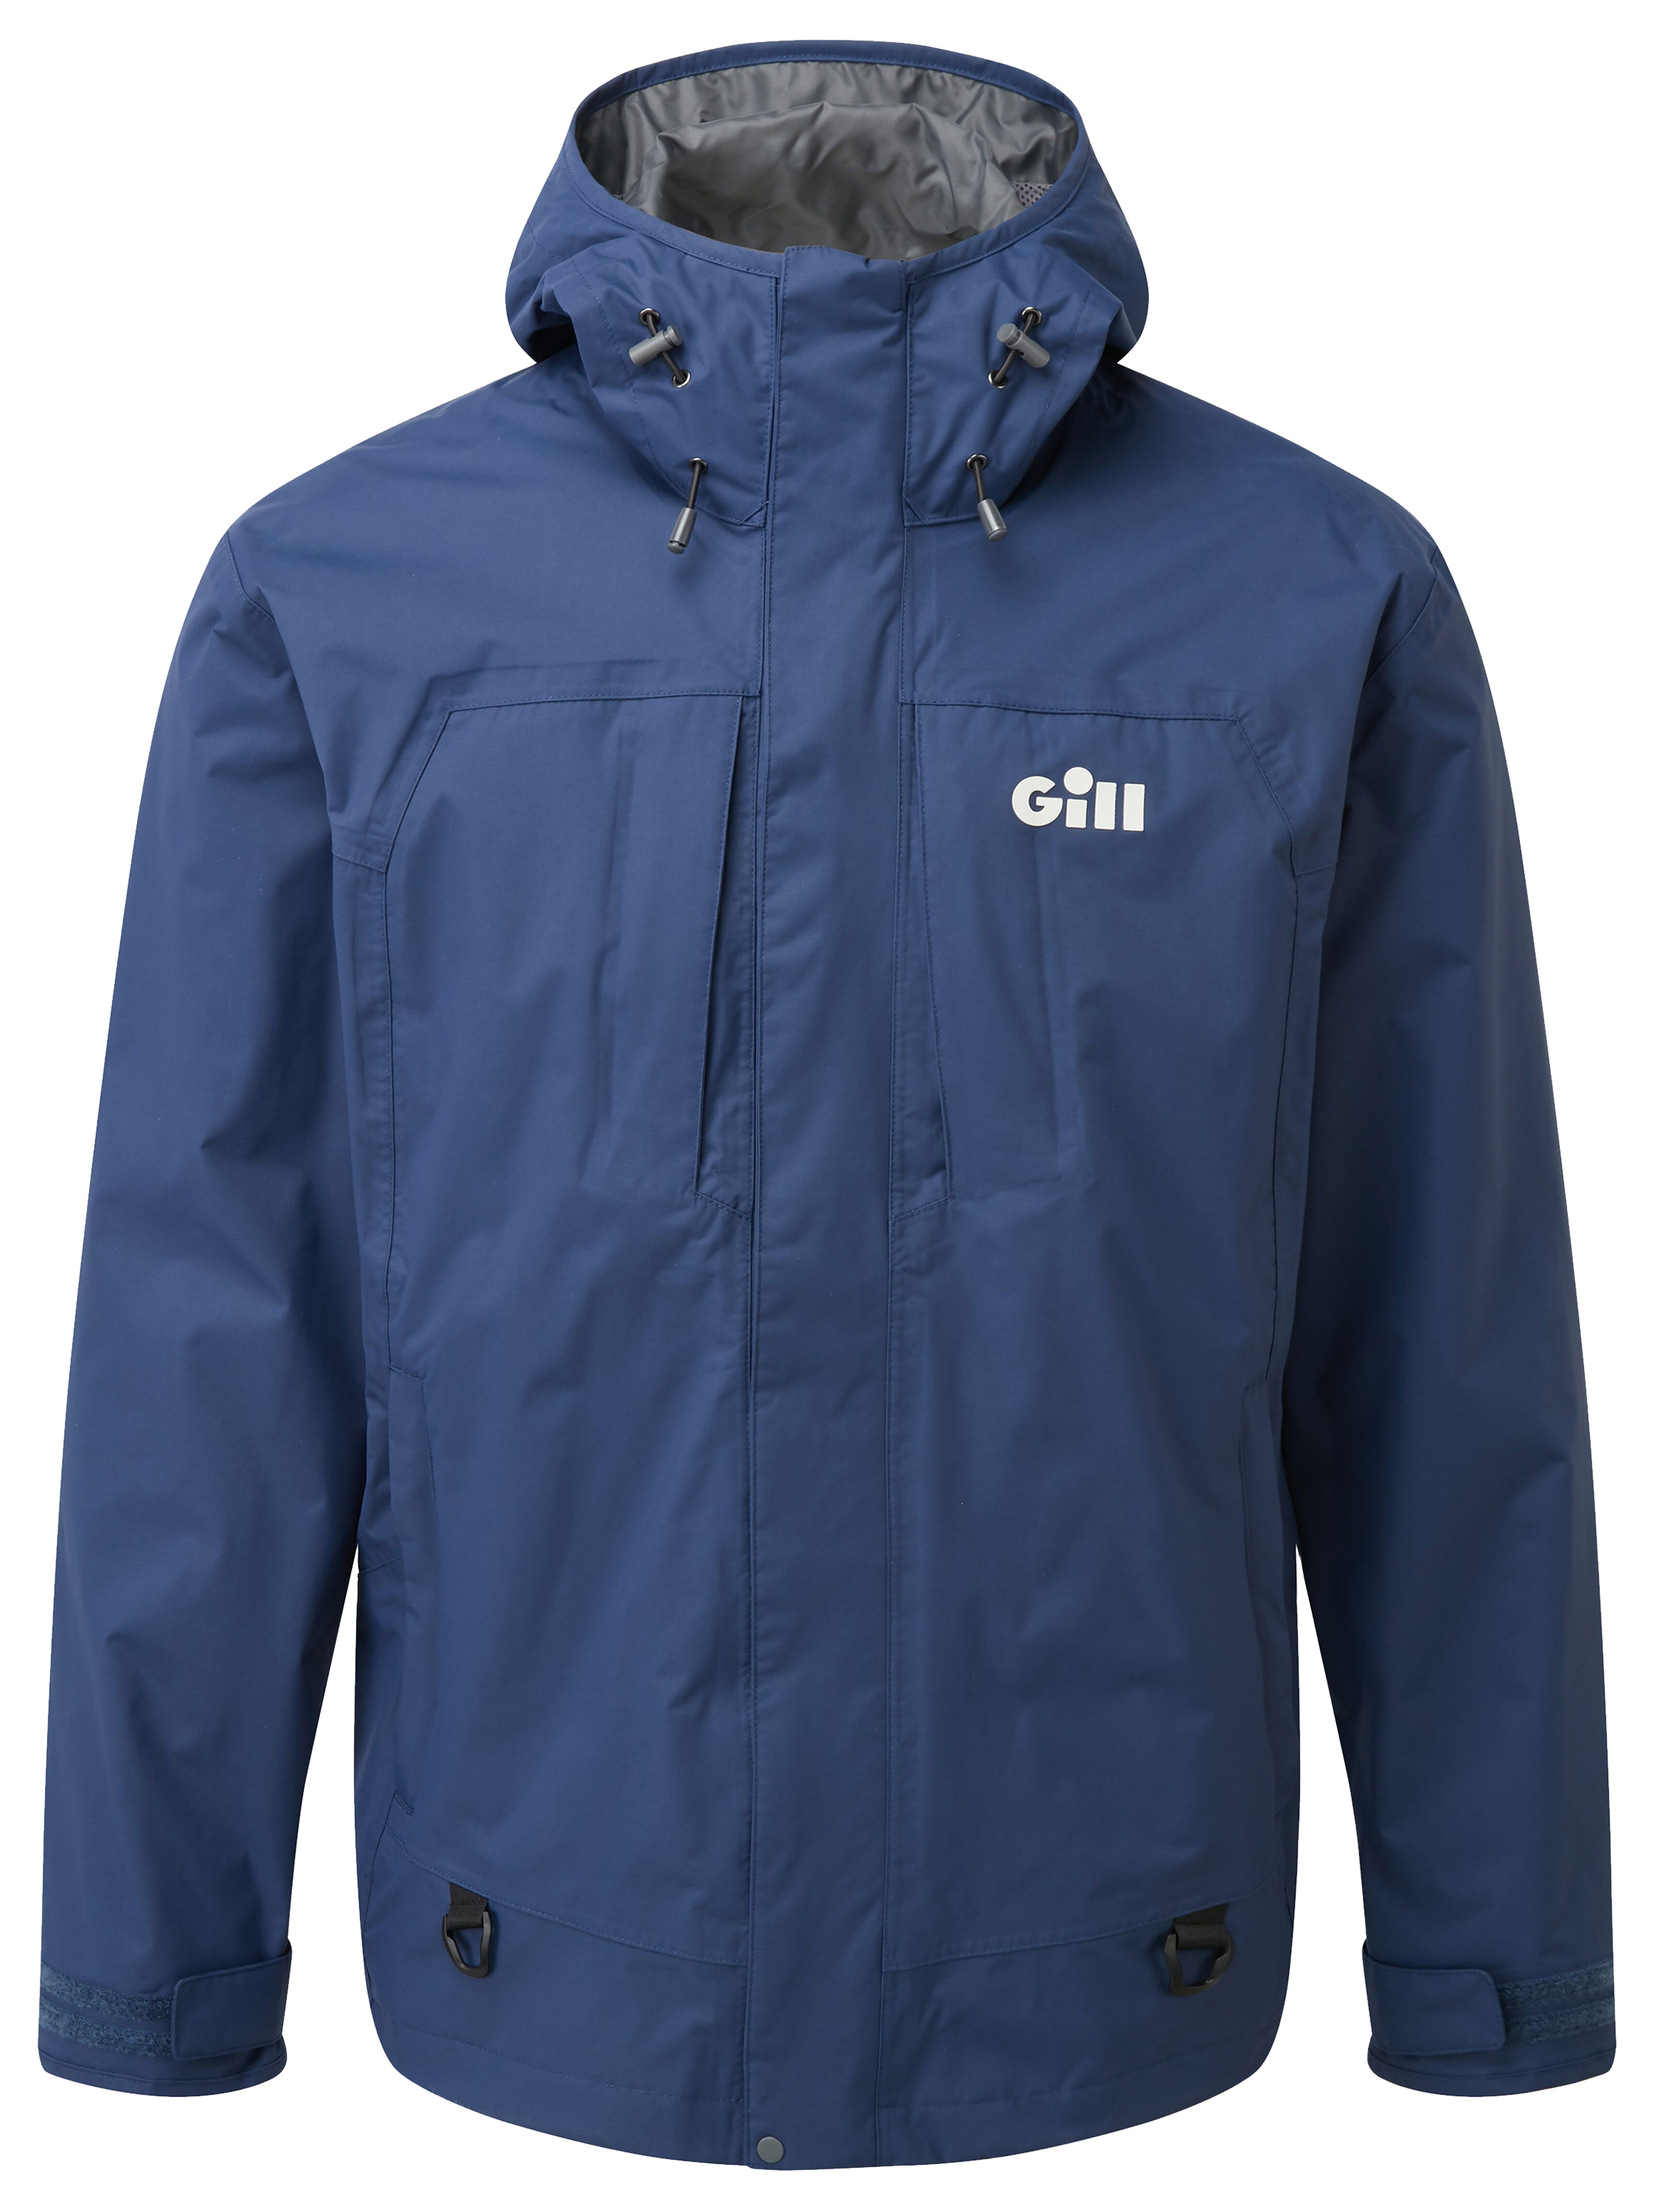 Gill Active Fishing Jacket for Men